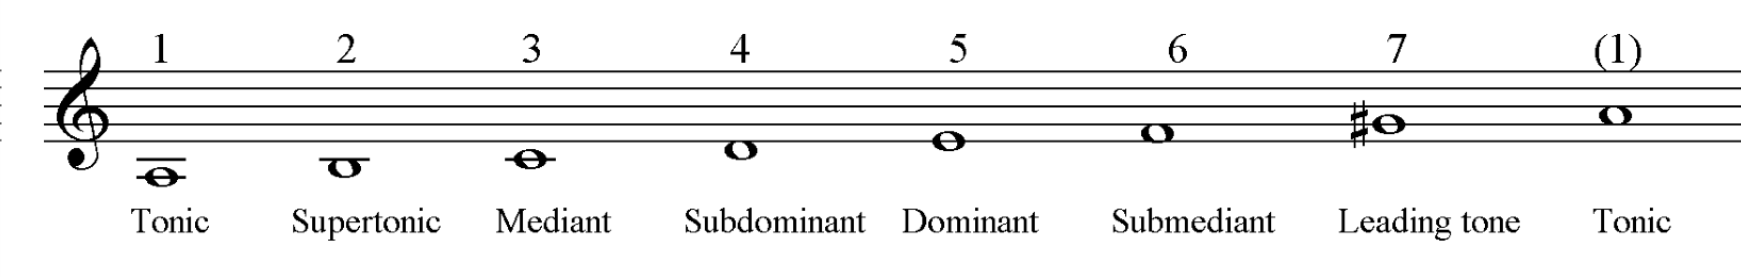 Scale degree names in minor